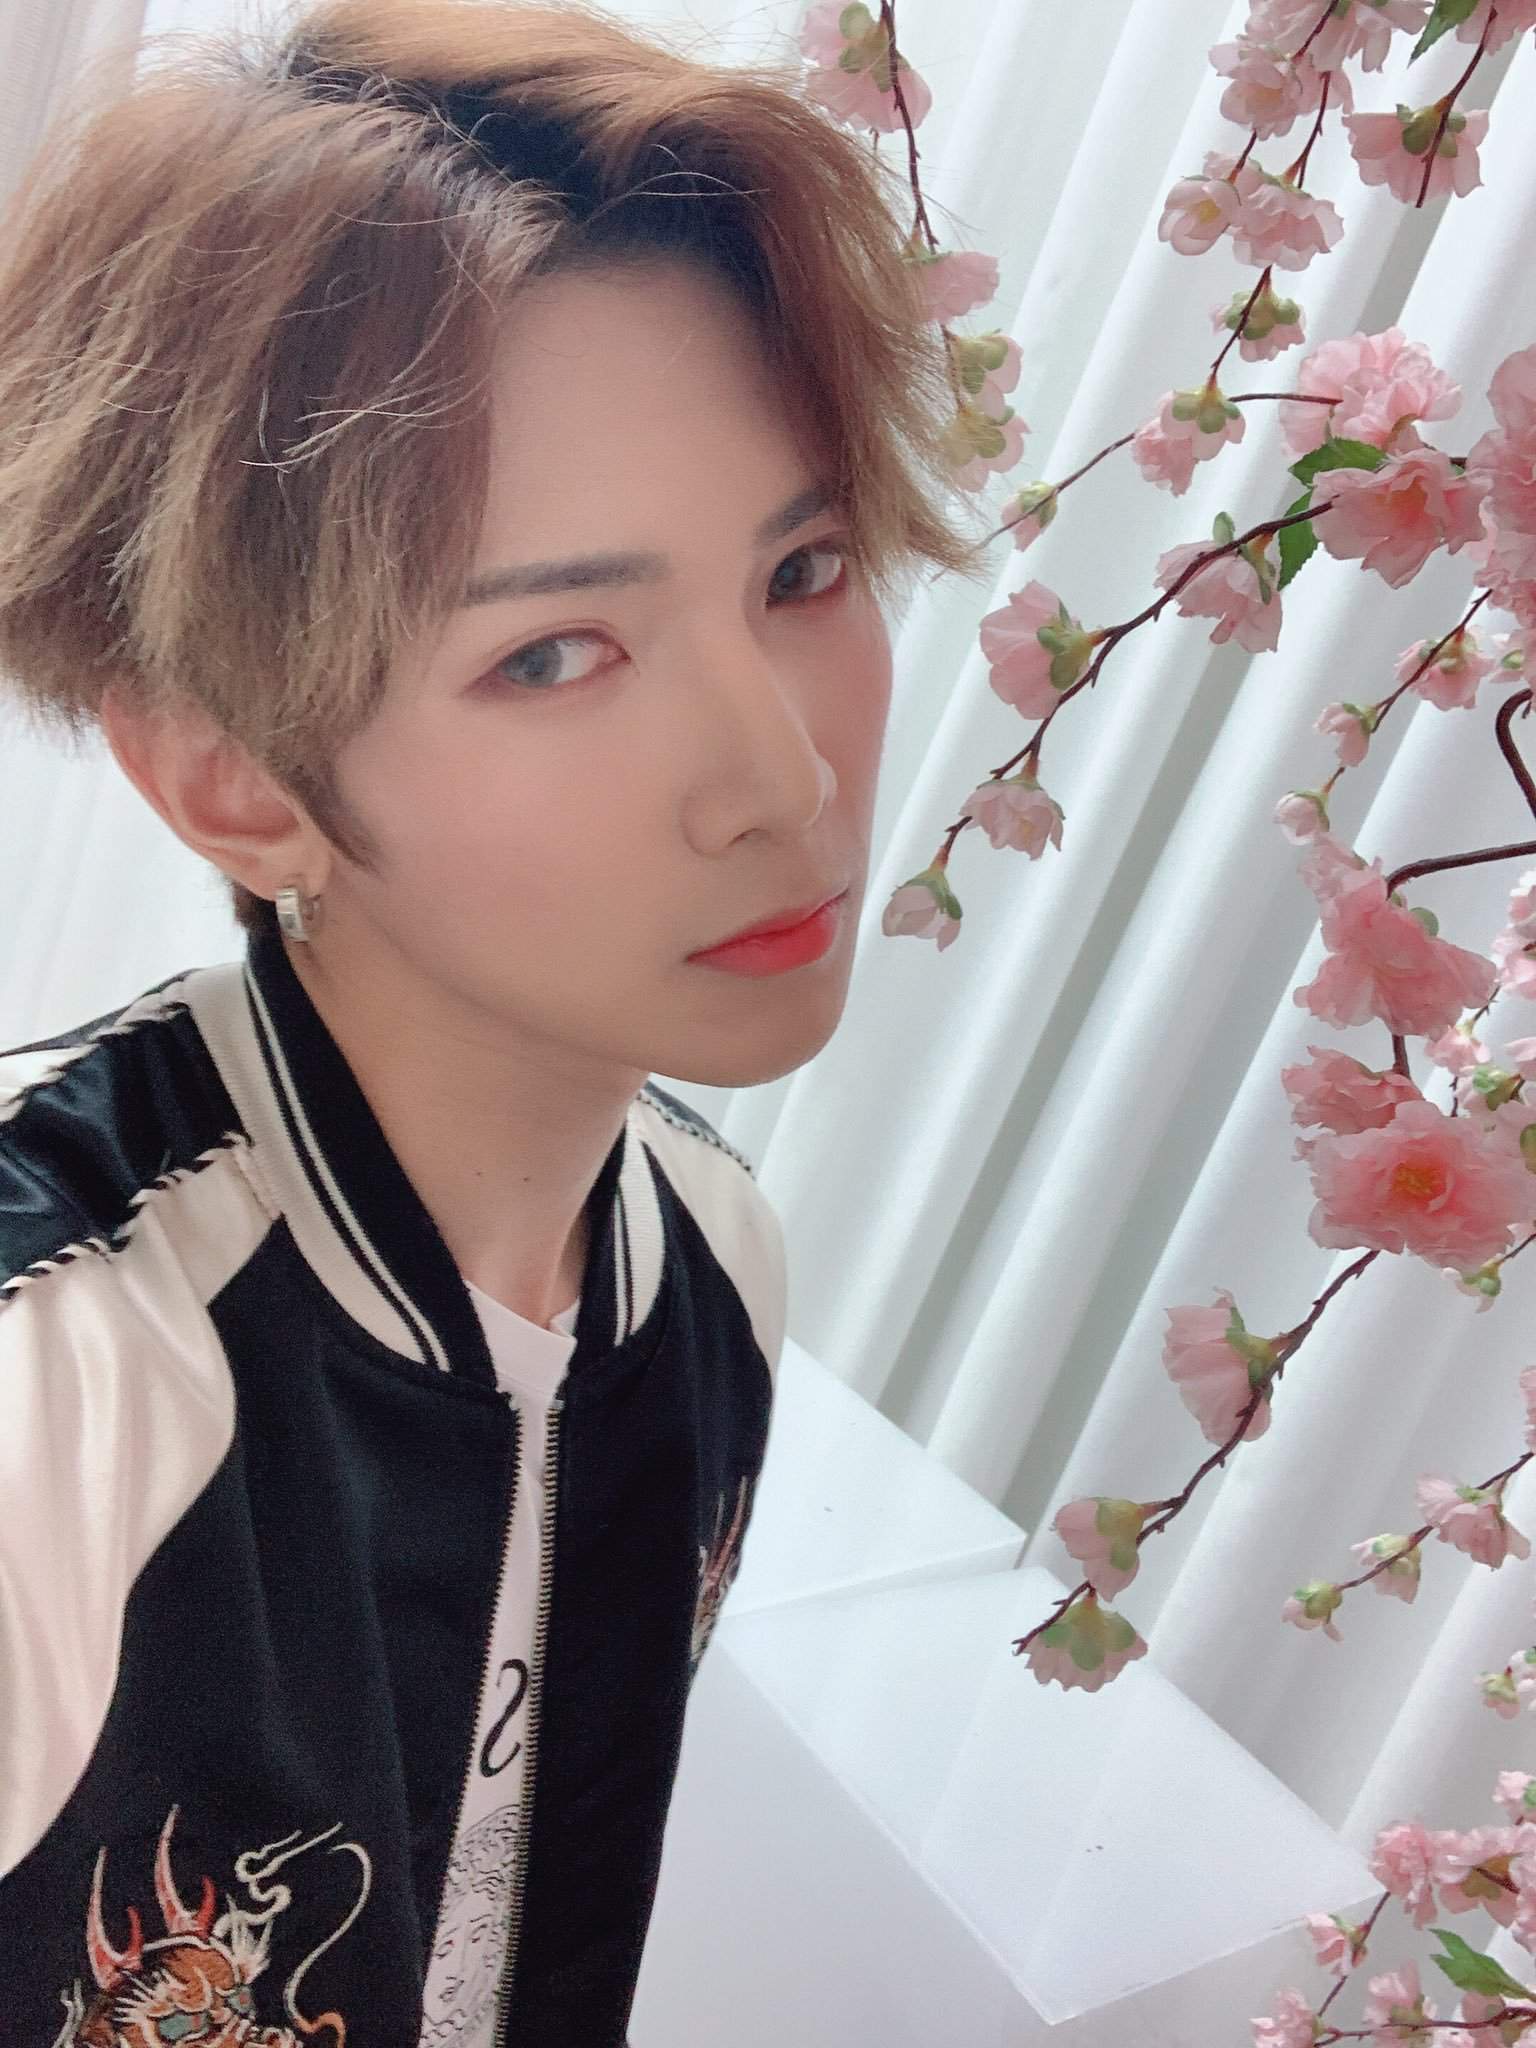 My Kang Yeosang always puts a smile on my face ☺ ️❤ ATEEZ AMINO Amino.